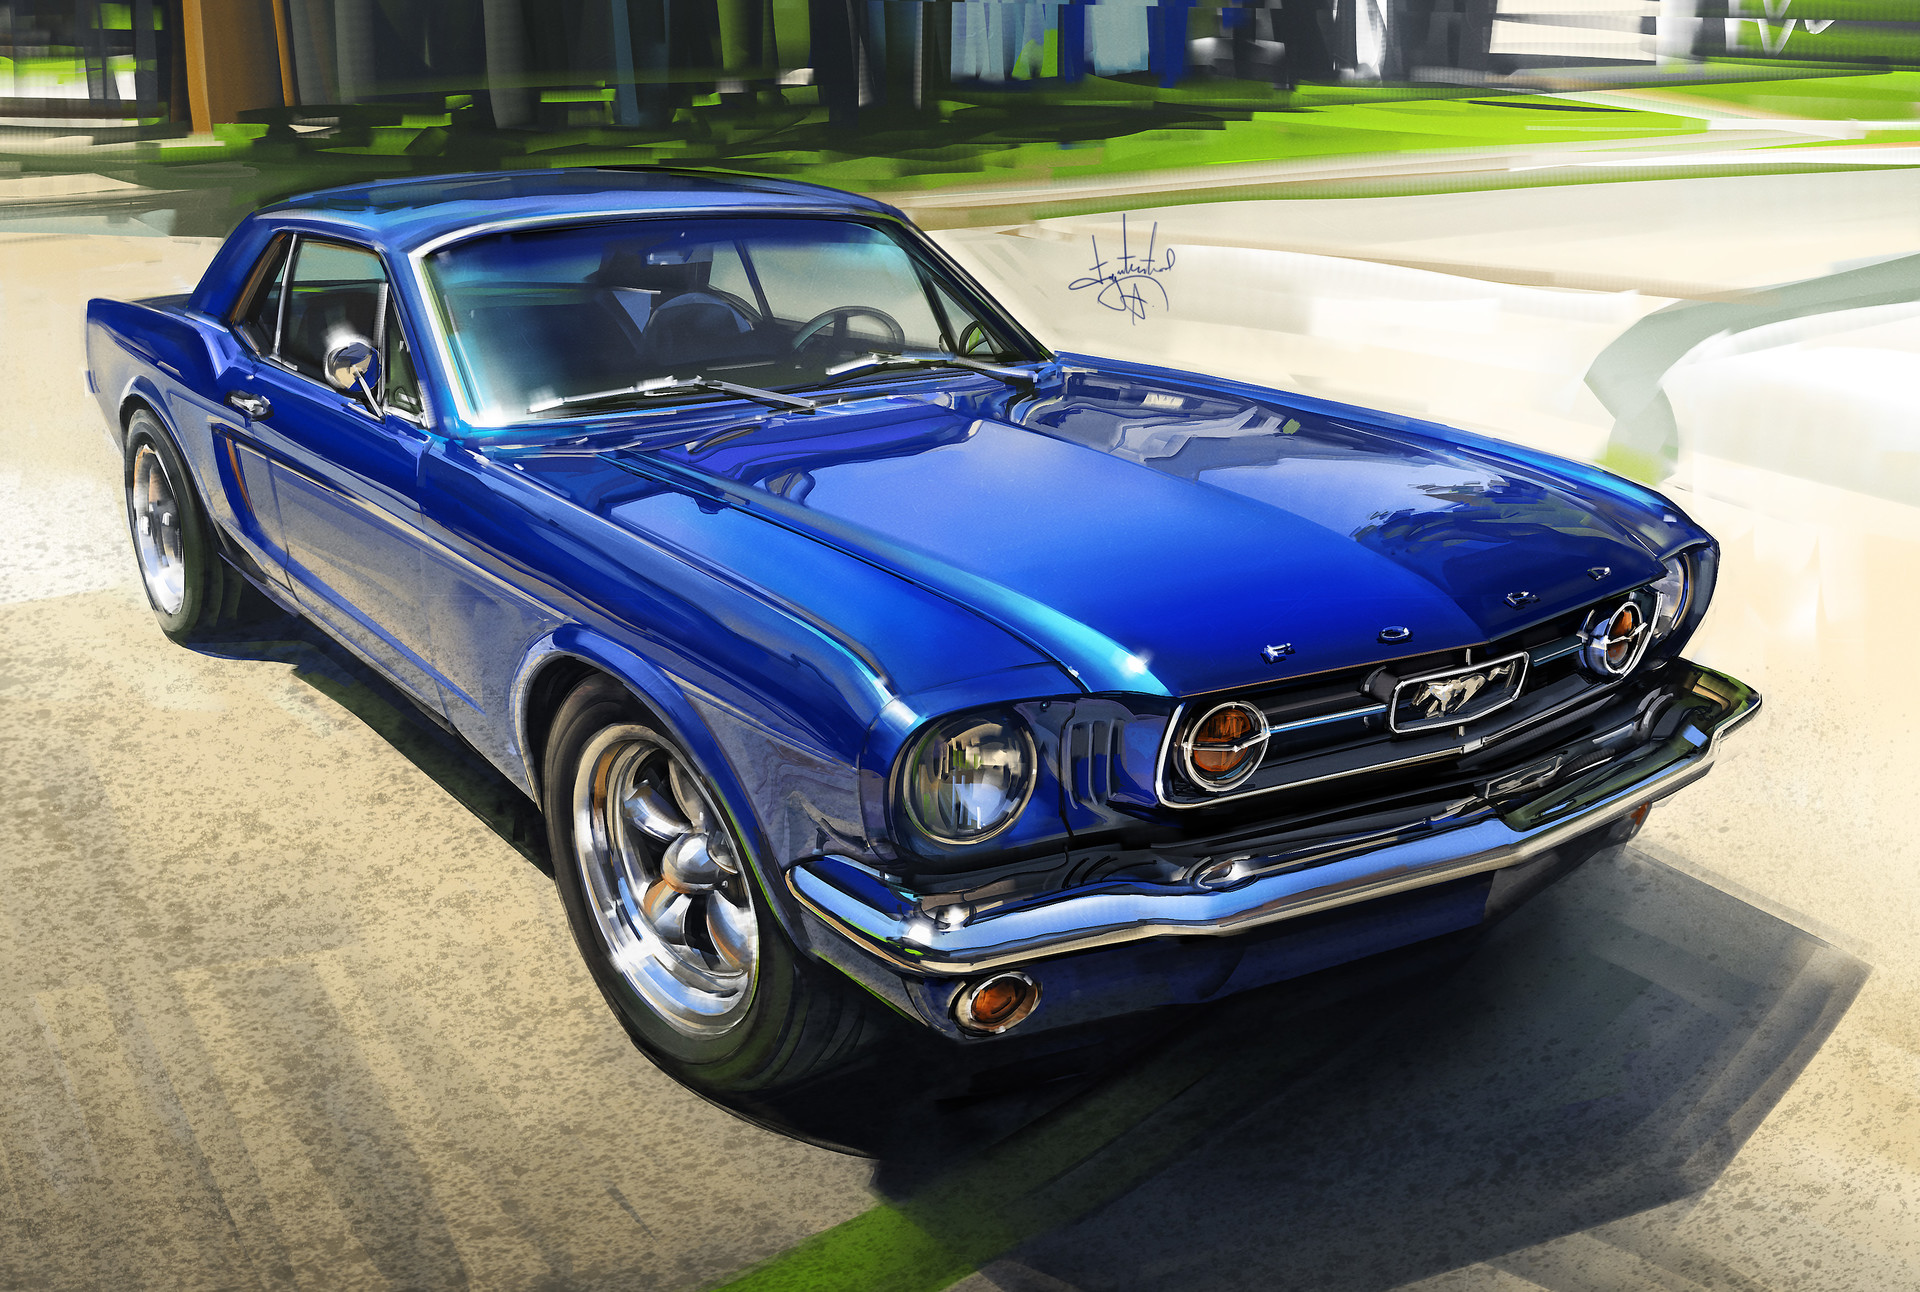 General 1920x1292 Aleksandr Sidelnikov car vehicle painting Ford Mustang street trees frontal view Ford muscle cars American cars